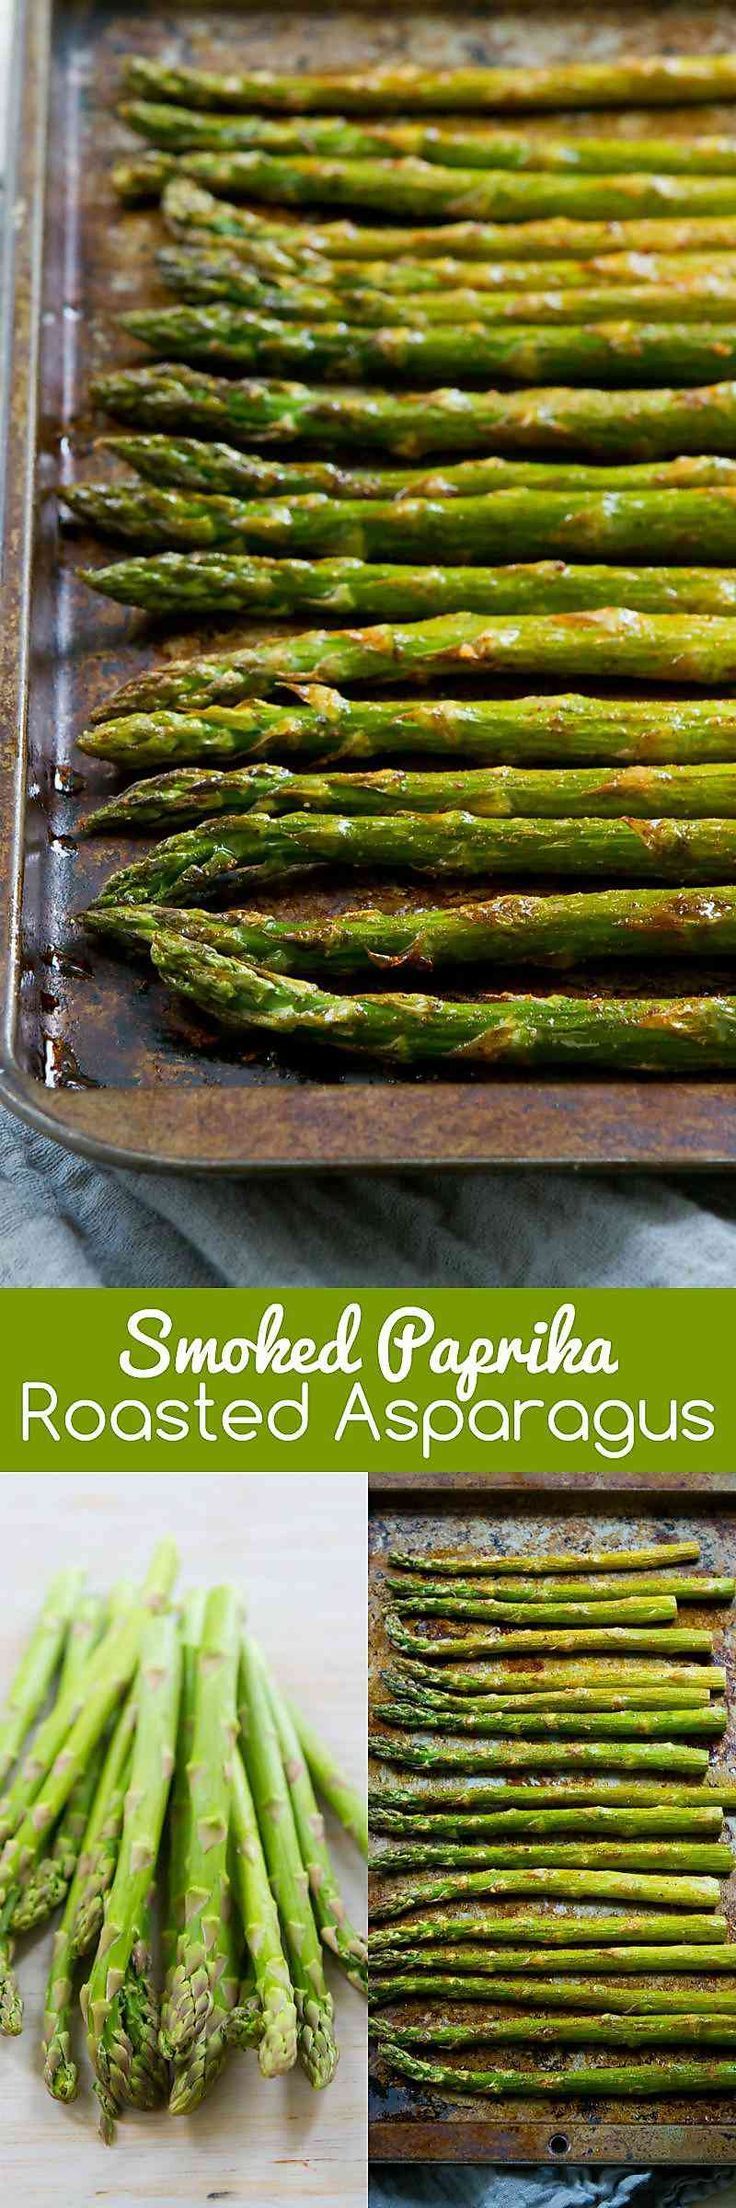 Only 5 ingredients needed for this delicious and healthy Smoked Paprika Roasted Asparagus side dish recipe! 47 calories and 1